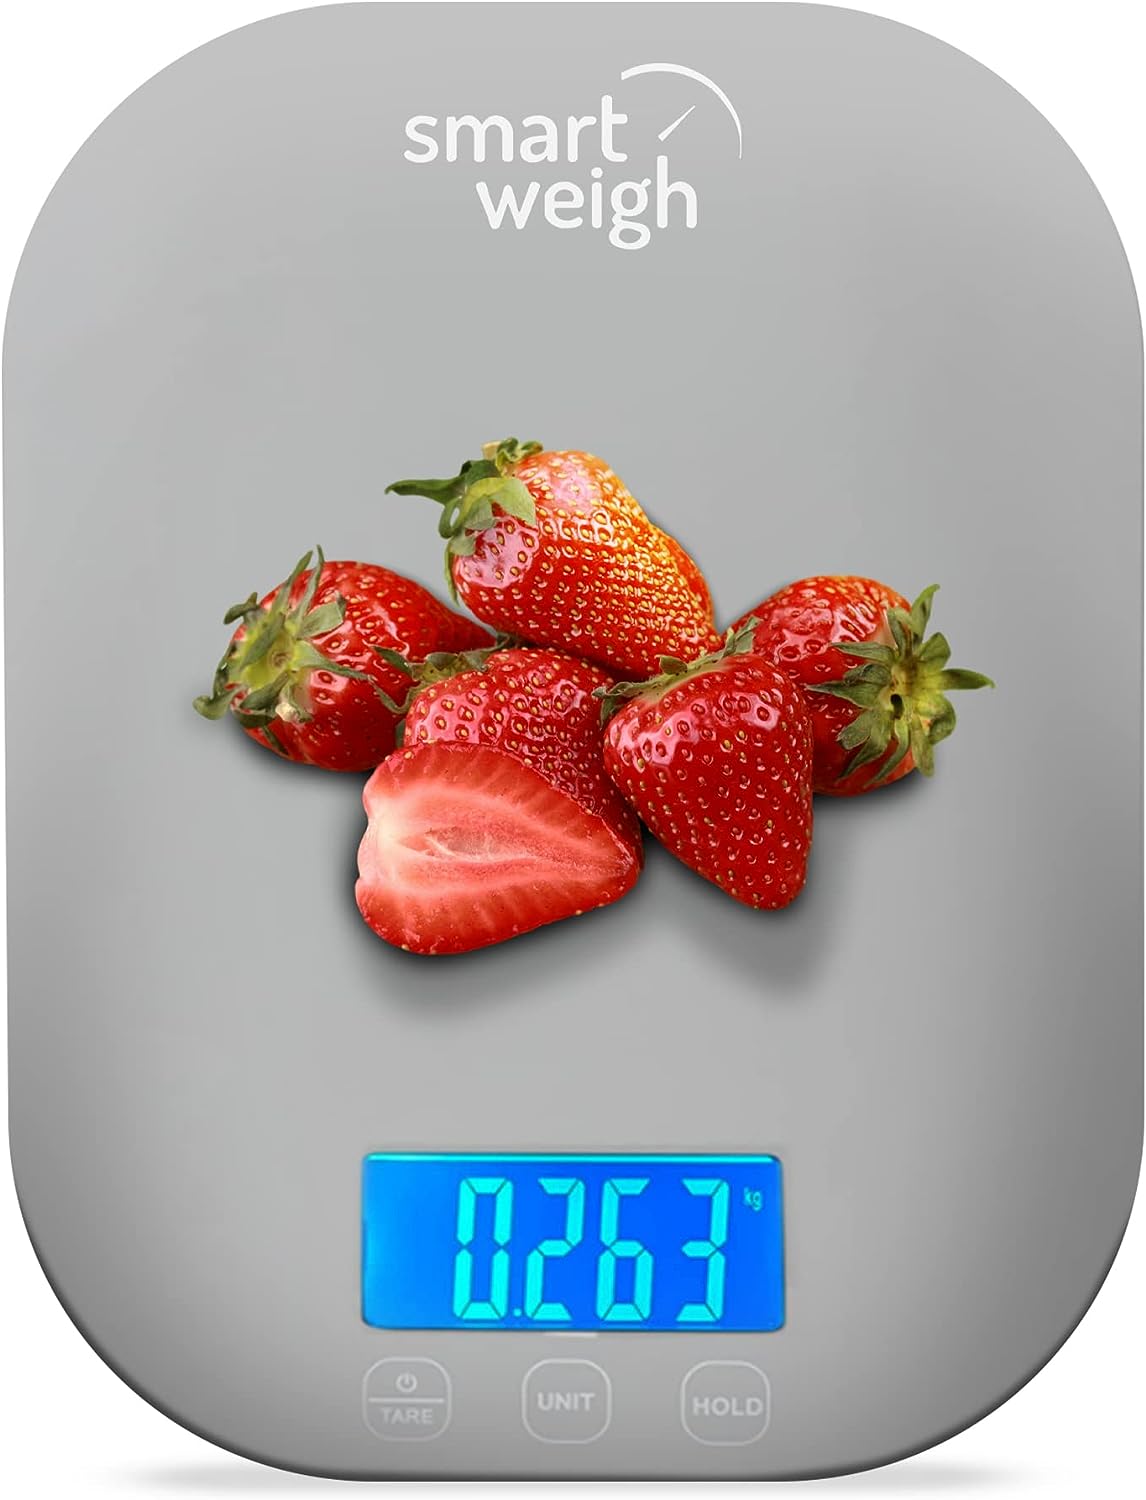 KAGO Food Scale - Kitchen Scales Digital Weight Grams and Oz,0.01oz/0.1g  7lb/3kg Waterproof Stainless Steel Weighing Platform for Cooking